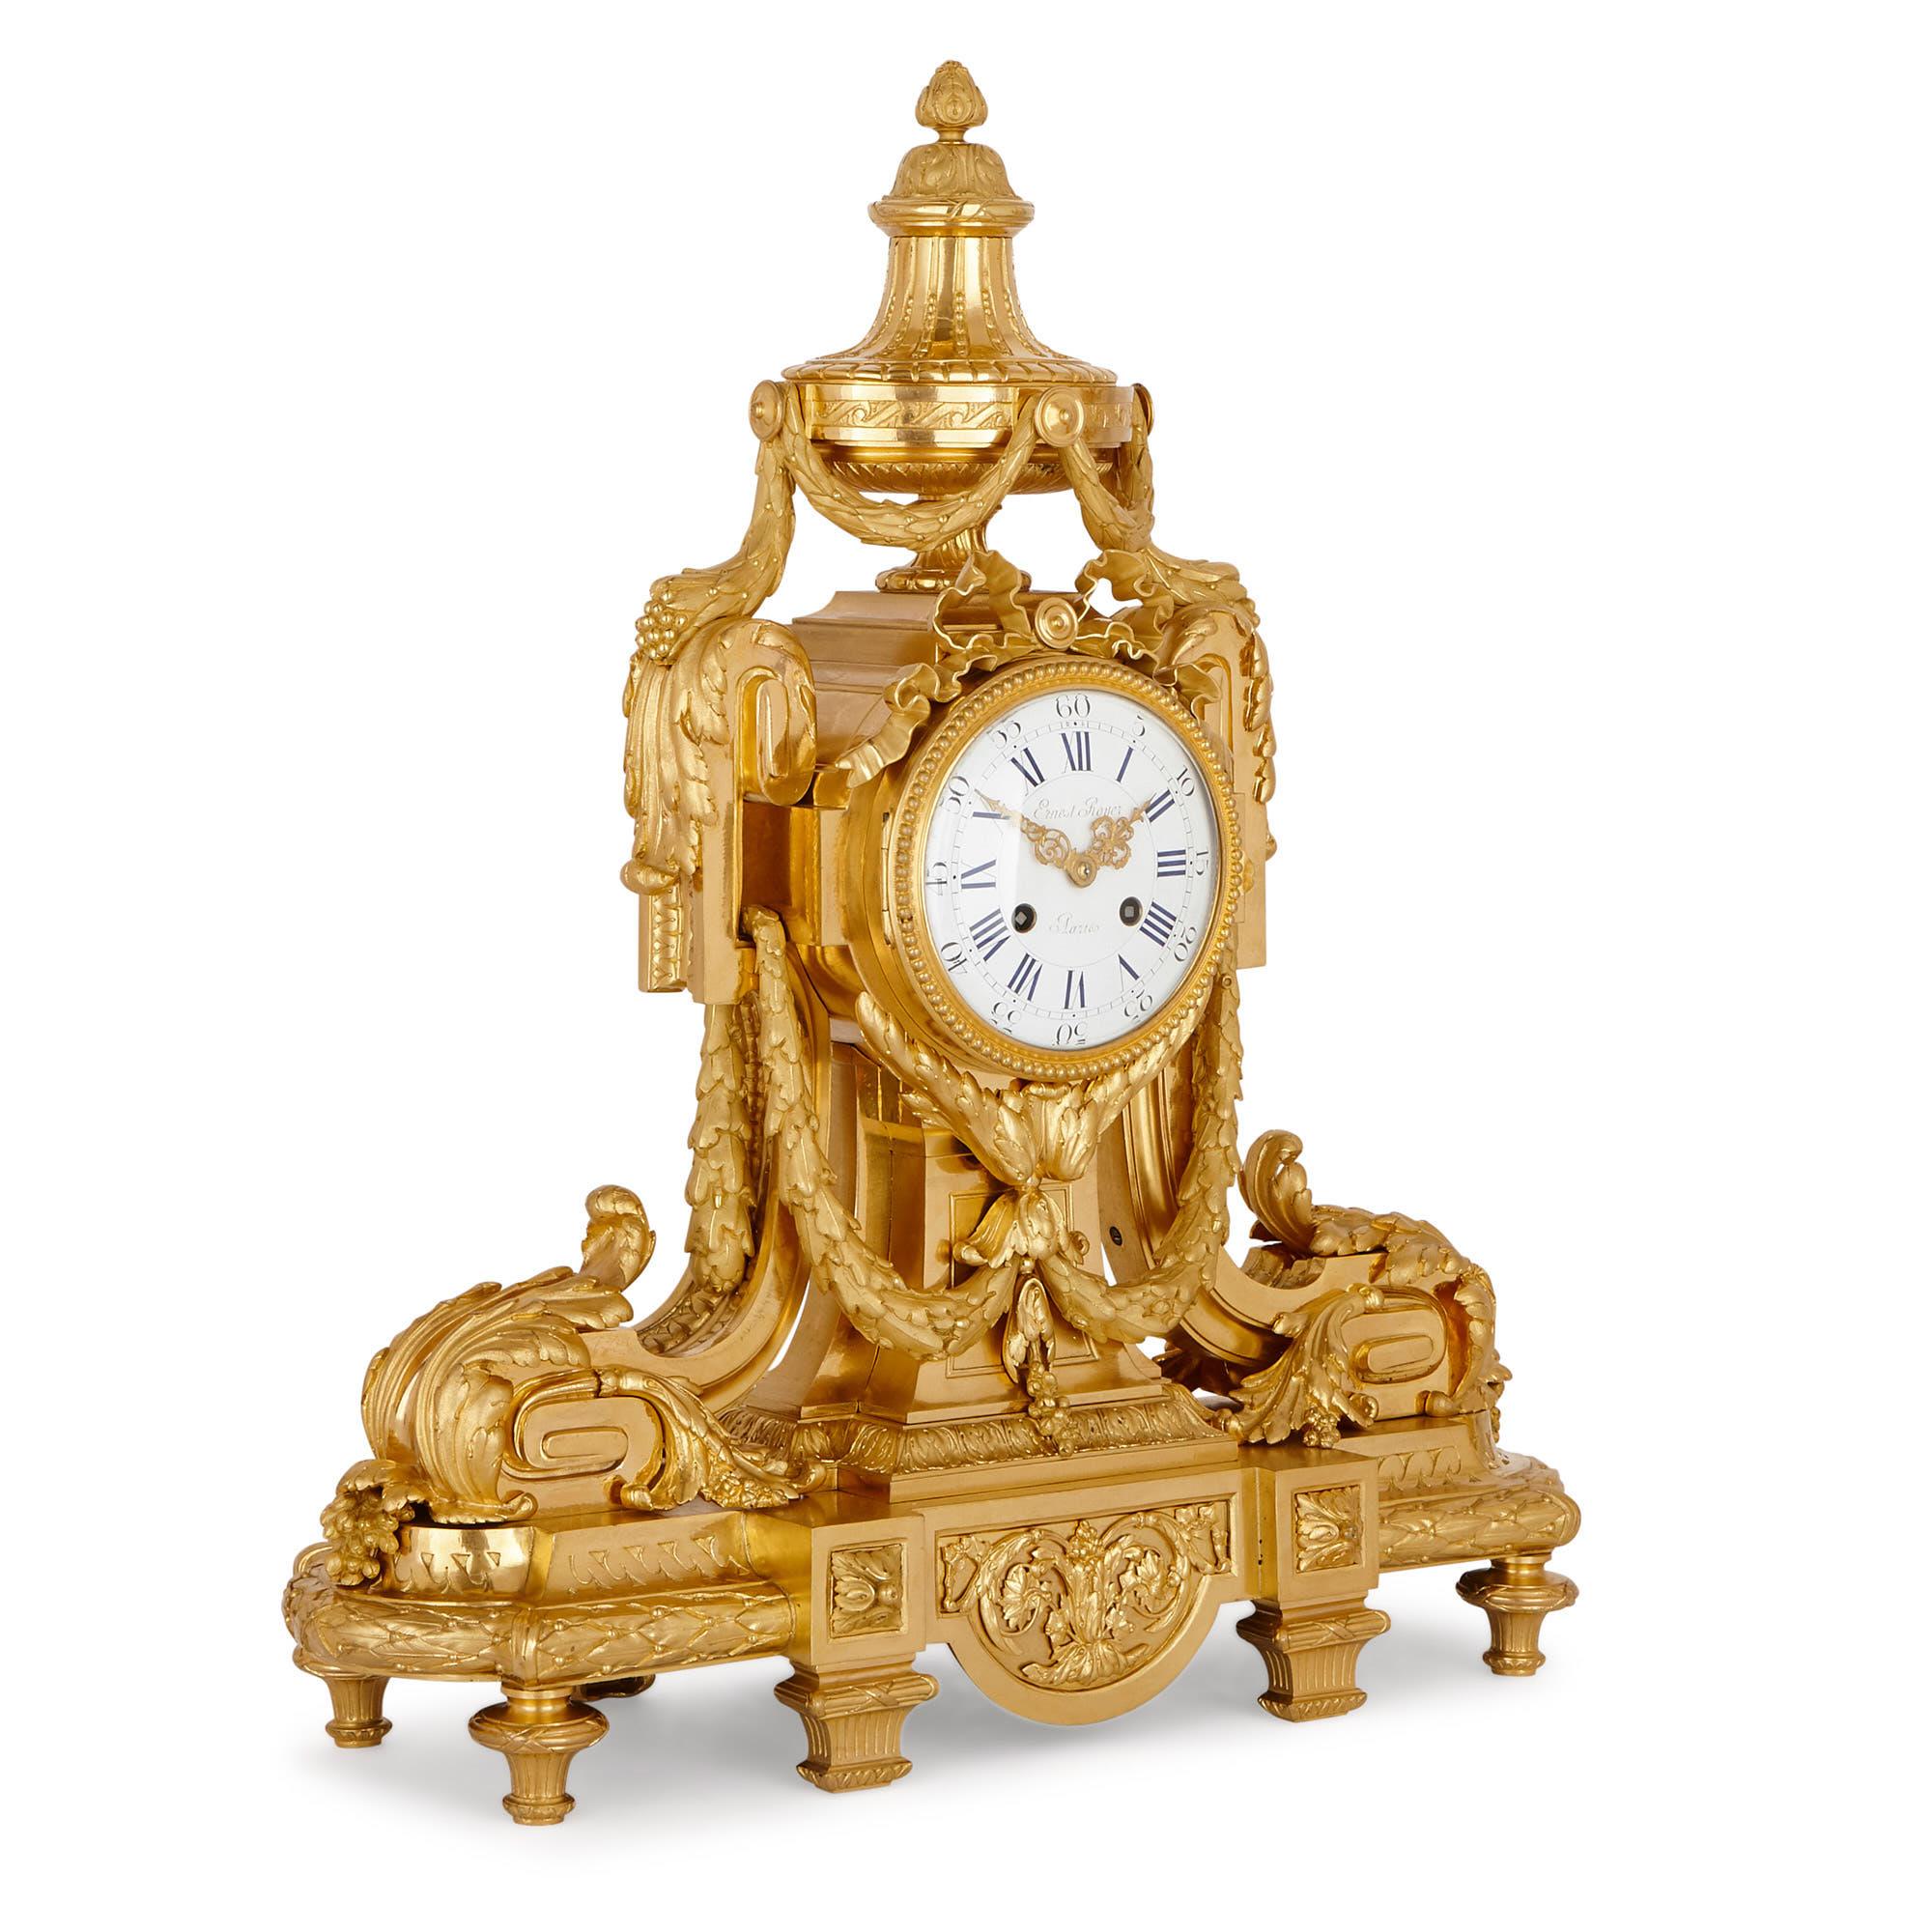 This beautiful gilt bronze (ormolu) clock set was crafted, circa 1870 in France. The set is designed in a rich Rococo style, after decorative art of the Louis XV period (1715-1774).

The set is comprised of a central mantel clock and a pair of